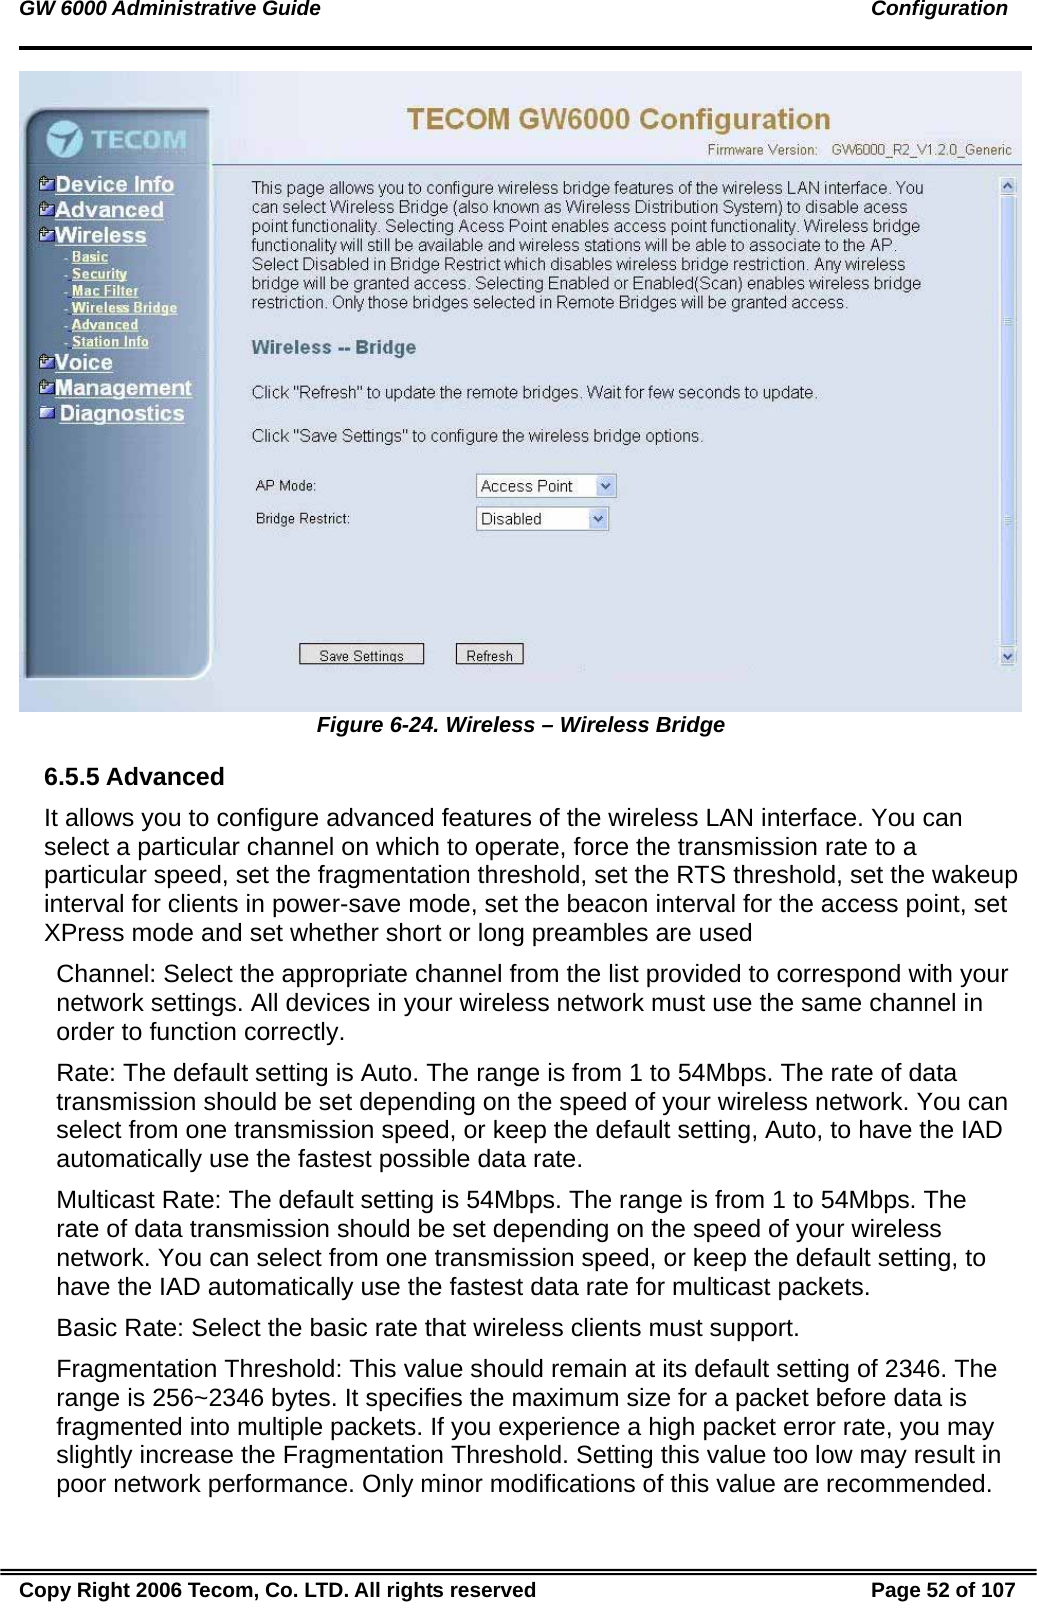 GW 6000 Administrative Guide                                                                                               Configuration  Figure 6-24. Wireless – Wireless Bridge 6.5.5 Advanced It allows you to configure advanced features of the wireless LAN interface. You can select a particular channel on which to operate, force the transmission rate to a particular speed, set the fragmentation threshold, set the RTS threshold, set the wakeup interval for clients in power-save mode, set the beacon interval for the access point, set XPress mode and set whether short or long preambles are used Channel: Select the appropriate channel from the list provided to correspond with your network settings. All devices in your wireless network must use the same channel in order to function correctly. Rate: The default setting is Auto. The range is from 1 to 54Mbps. The rate of data transmission should be set depending on the speed of your wireless network. You can select from one transmission speed, or keep the default setting, Auto, to have the IAD automatically use the fastest possible data rate. Multicast Rate: The default setting is 54Mbps. The range is from 1 to 54Mbps. The rate of data transmission should be set depending on the speed of your wireless network. You can select from one transmission speed, or keep the default setting, to have the IAD automatically use the fastest data rate for multicast packets. Basic Rate: Select the basic rate that wireless clients must support. Fragmentation Threshold: This value should remain at its default setting of 2346. The range is 256~2346 bytes. It specifies the maximum size for a packet before data is fragmented into multiple packets. If you experience a high packet error rate, you may slightly increase the Fragmentation Threshold. Setting this value too low may result in poor network performance. Only minor modifications of this value are recommended. Copy Right 2006 Tecom, Co. LTD. All rights reserved  Page 52 of 107 